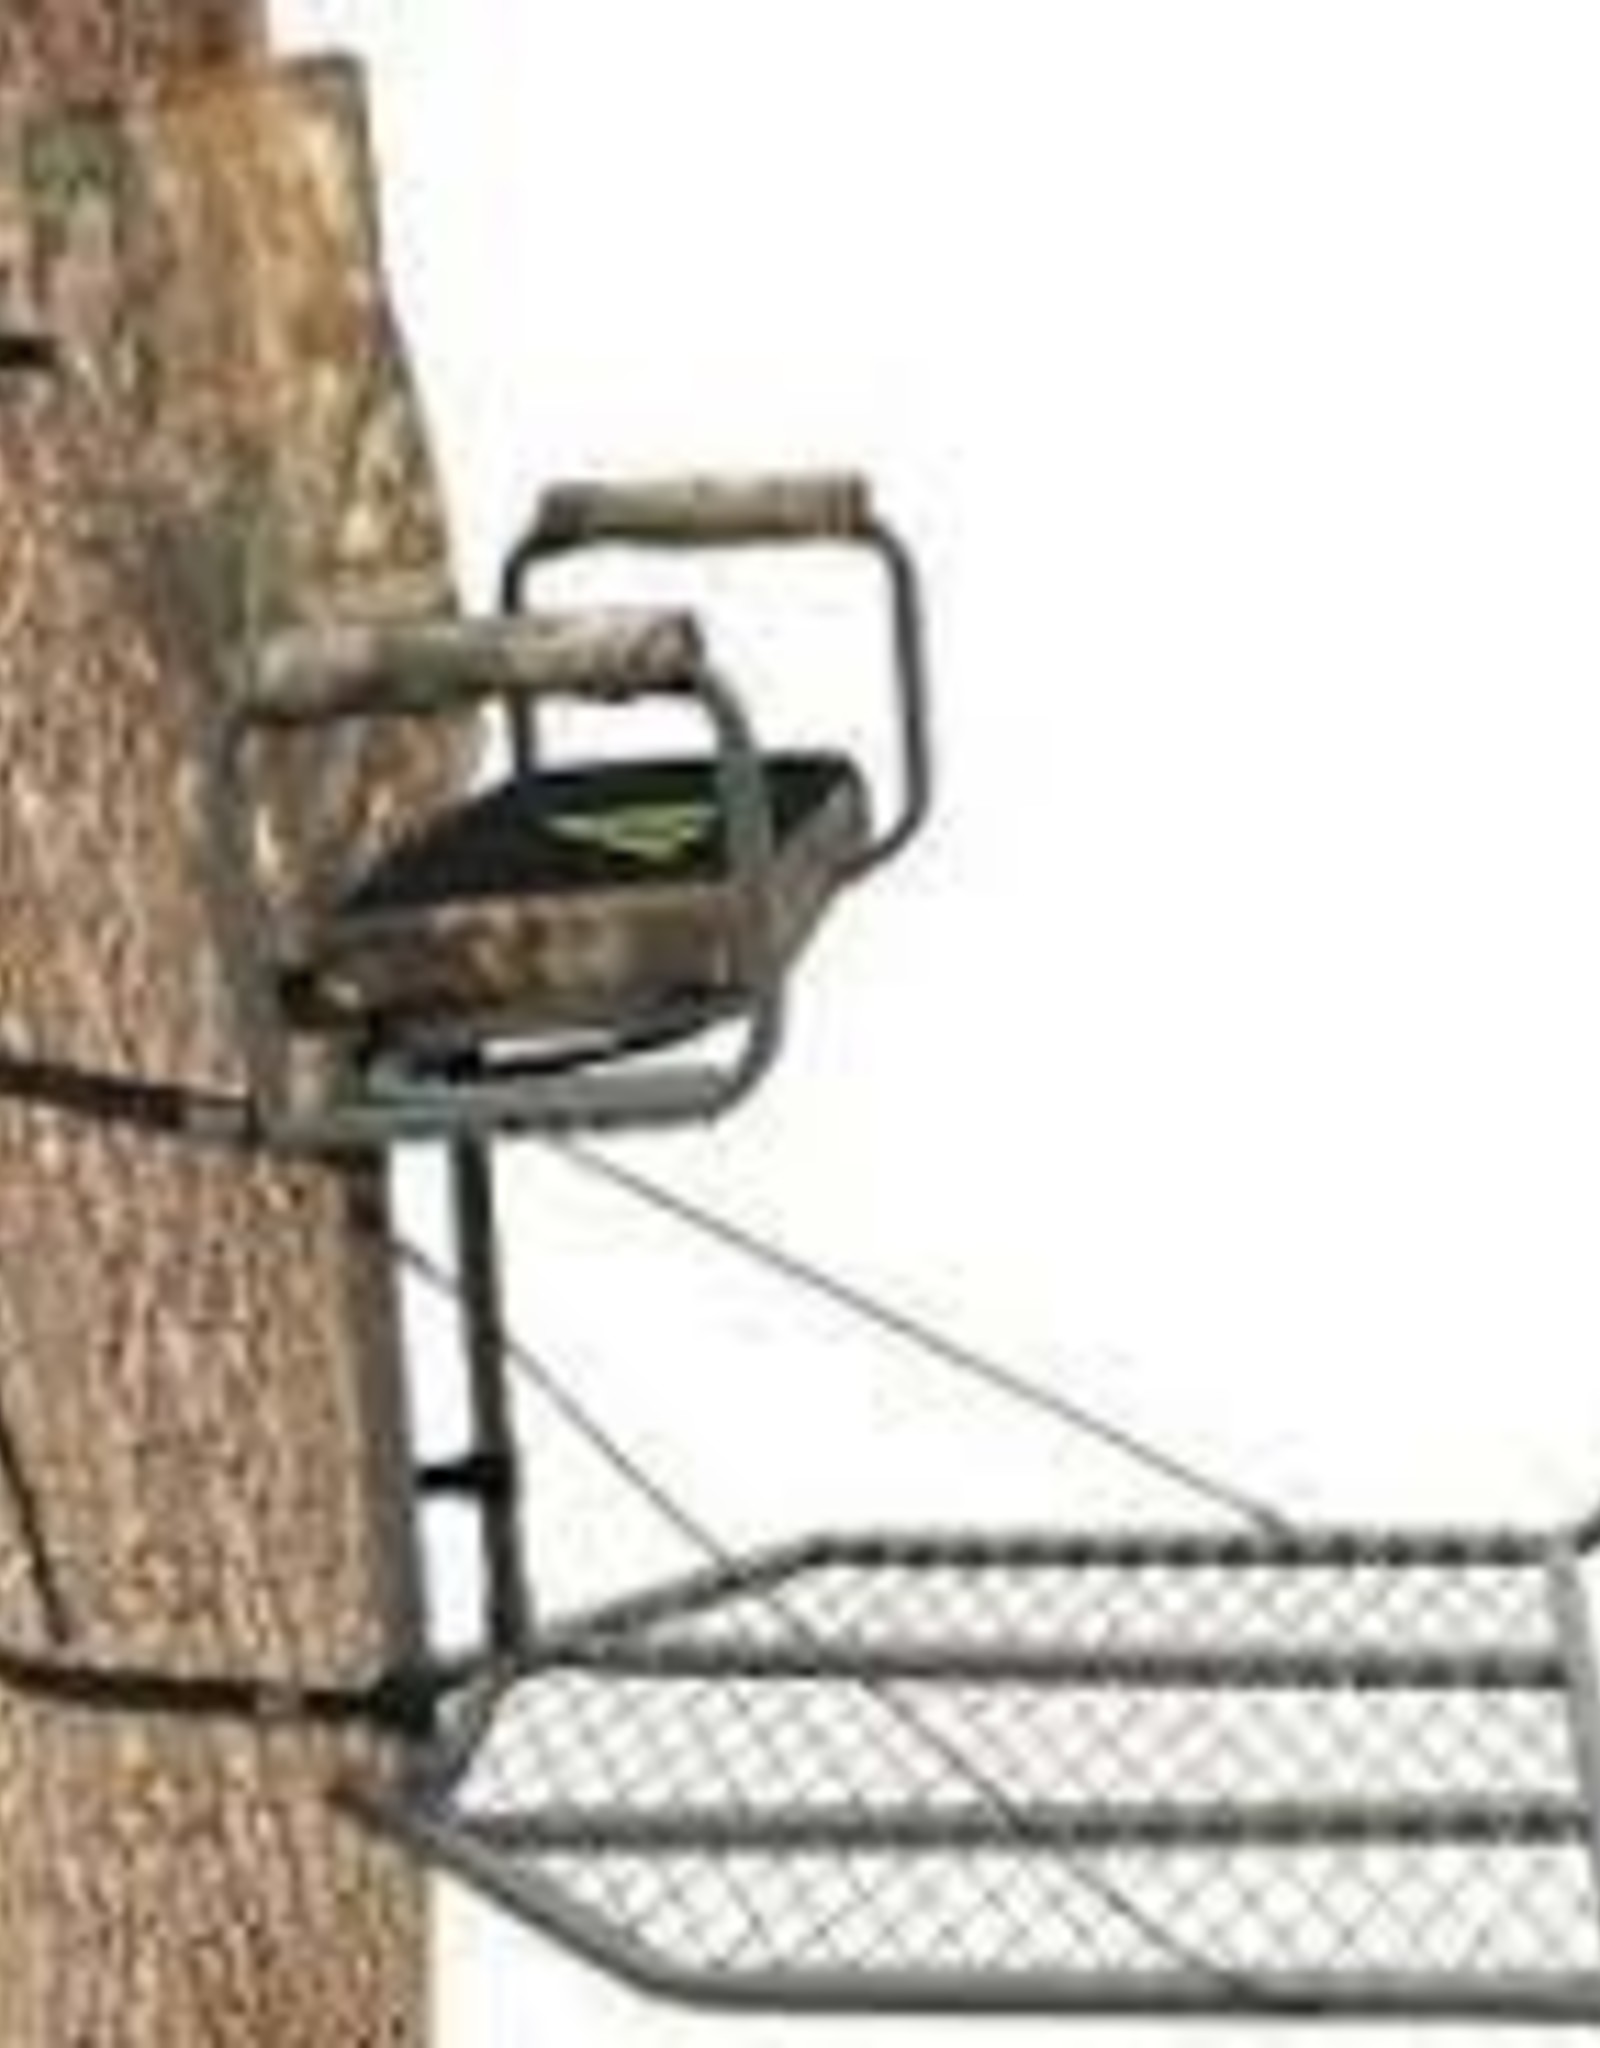 Altan Safe Outdoors Sniper Pro Tree Stand